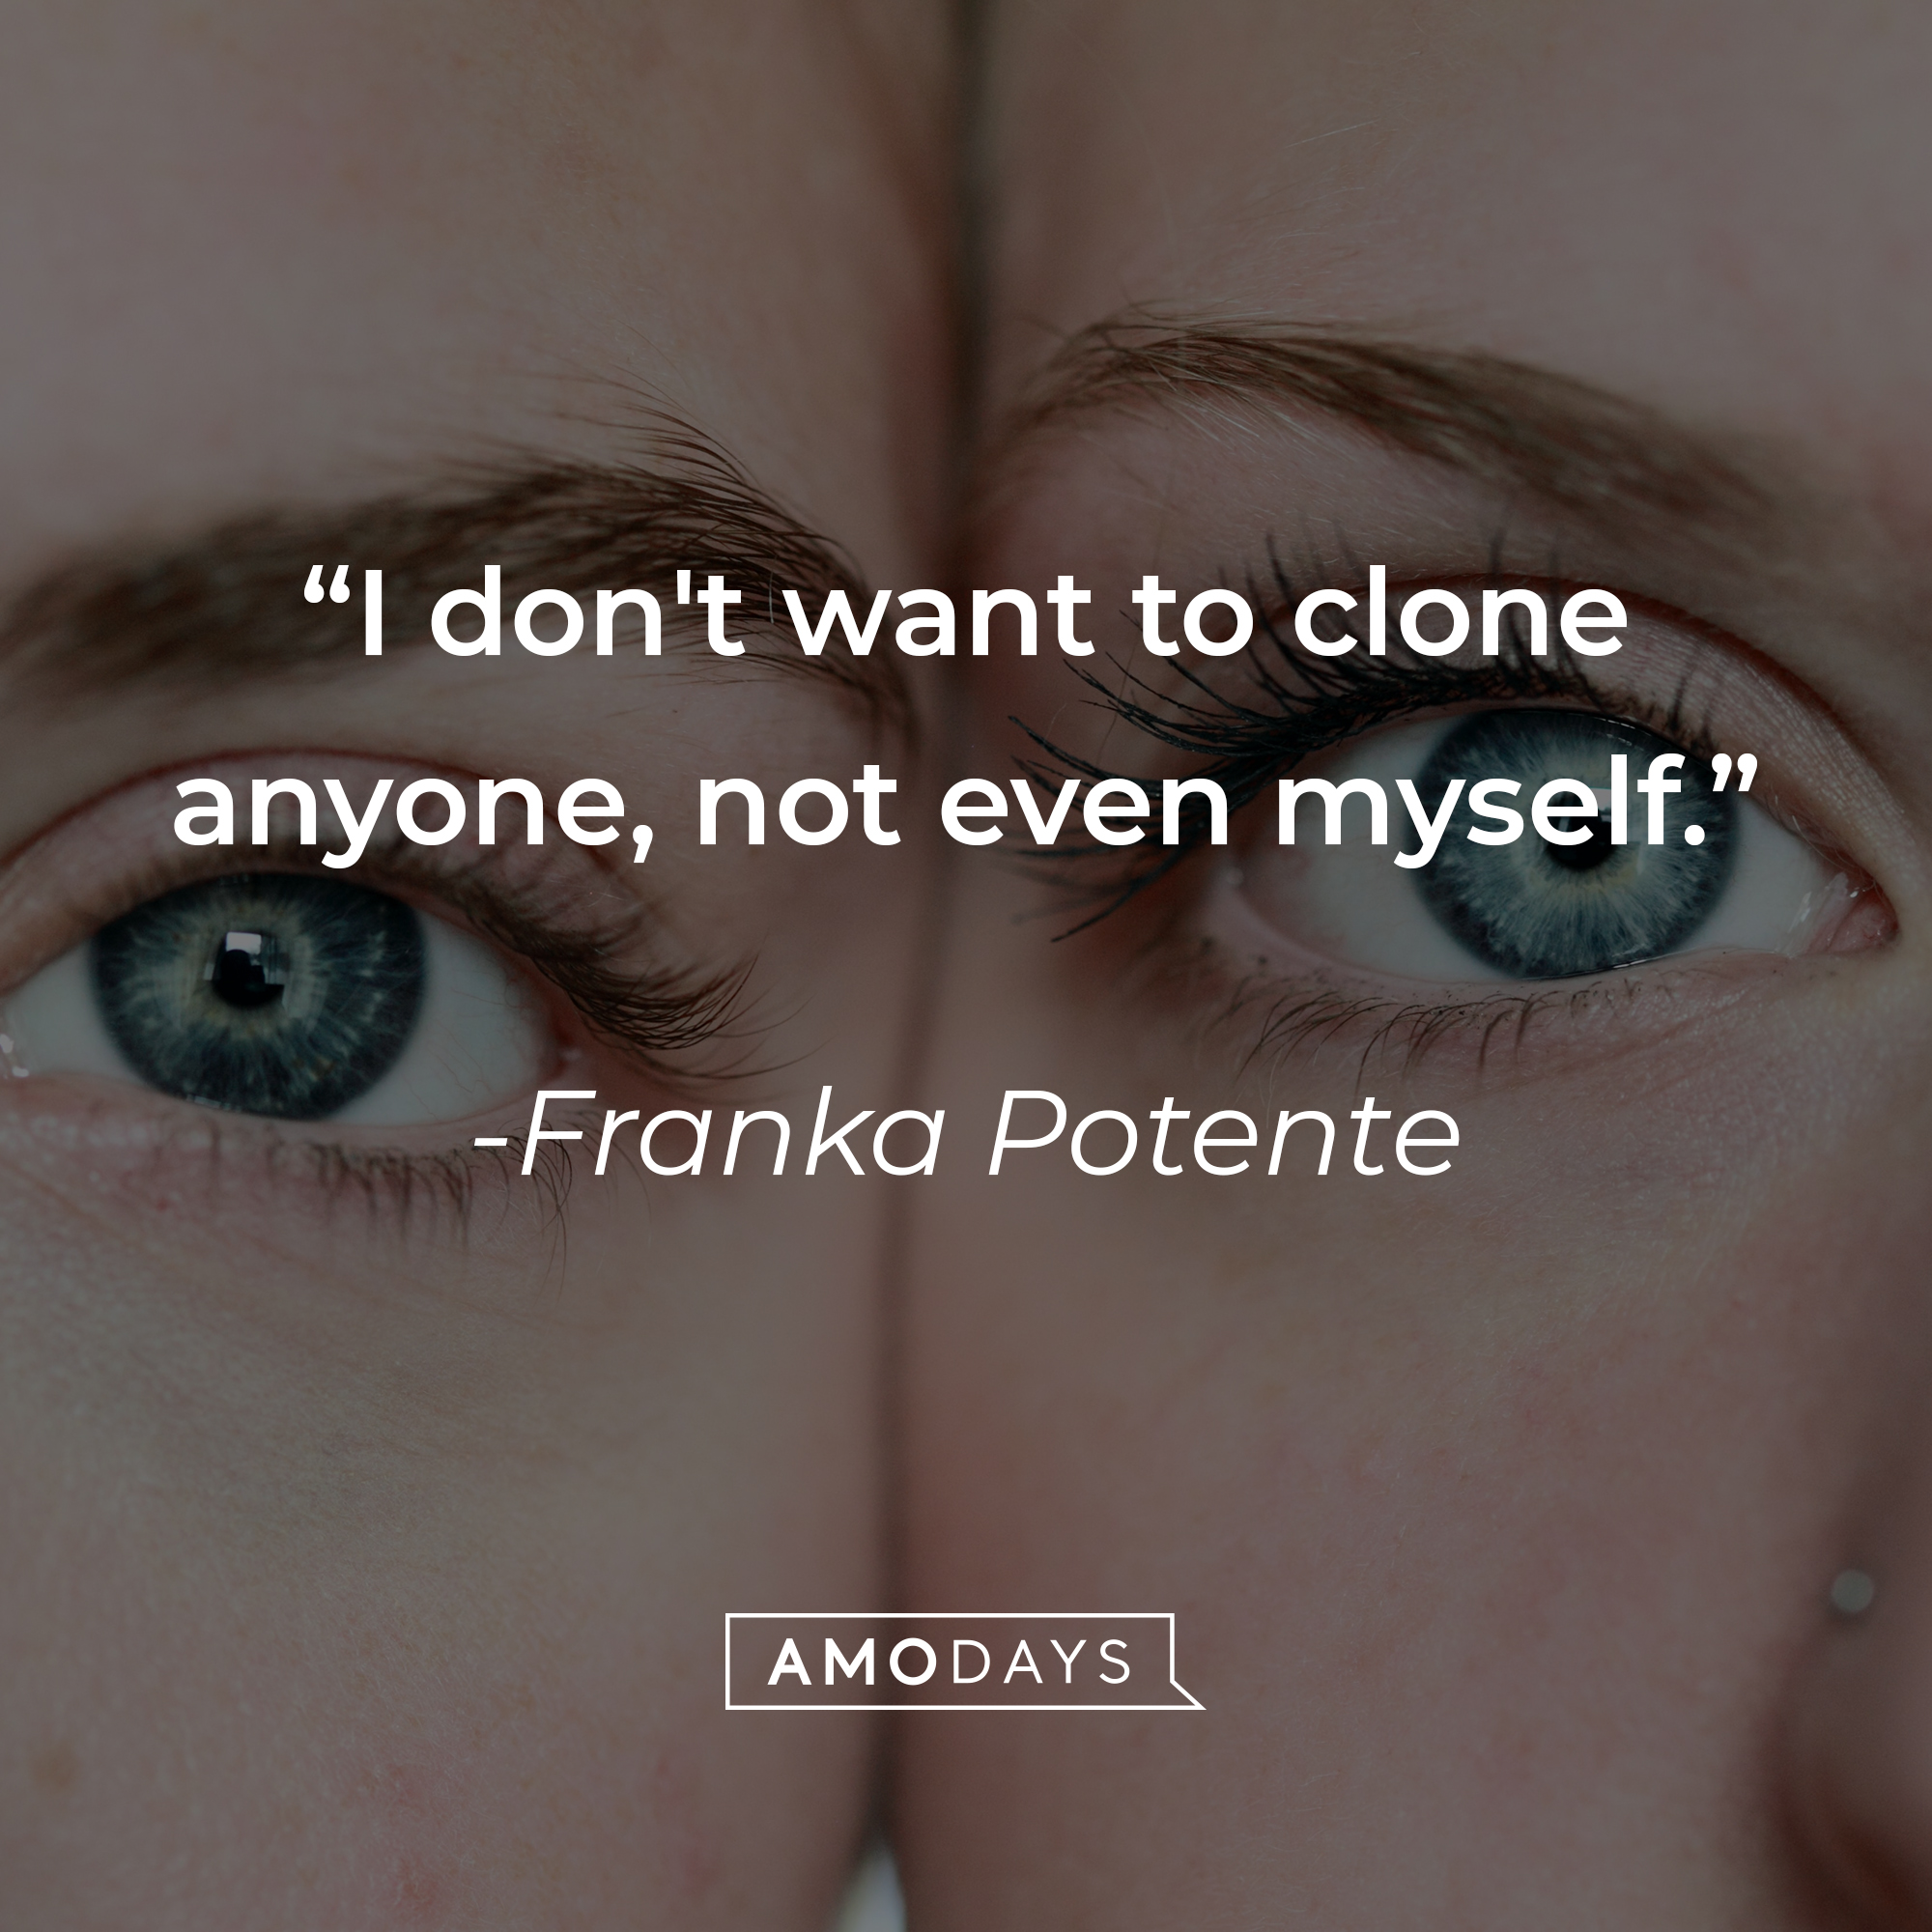 Franka Potente's quote, "I don't want to clone anyone, not even myself." | Image: Unsplash.com